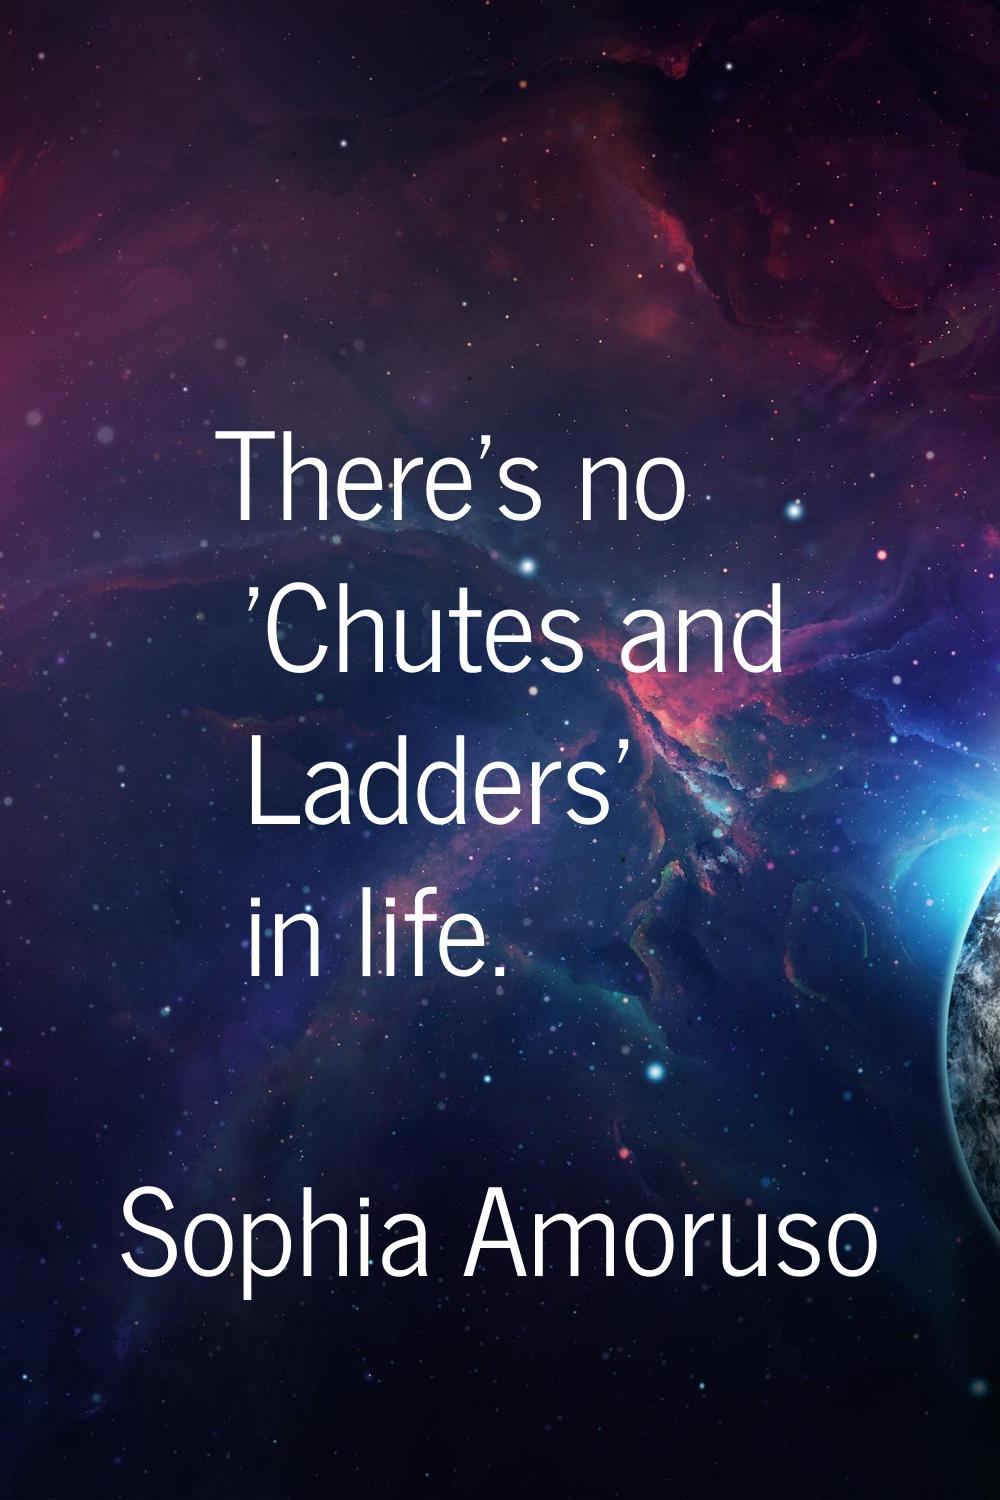 There's no 'Chutes and Ladders' in life.